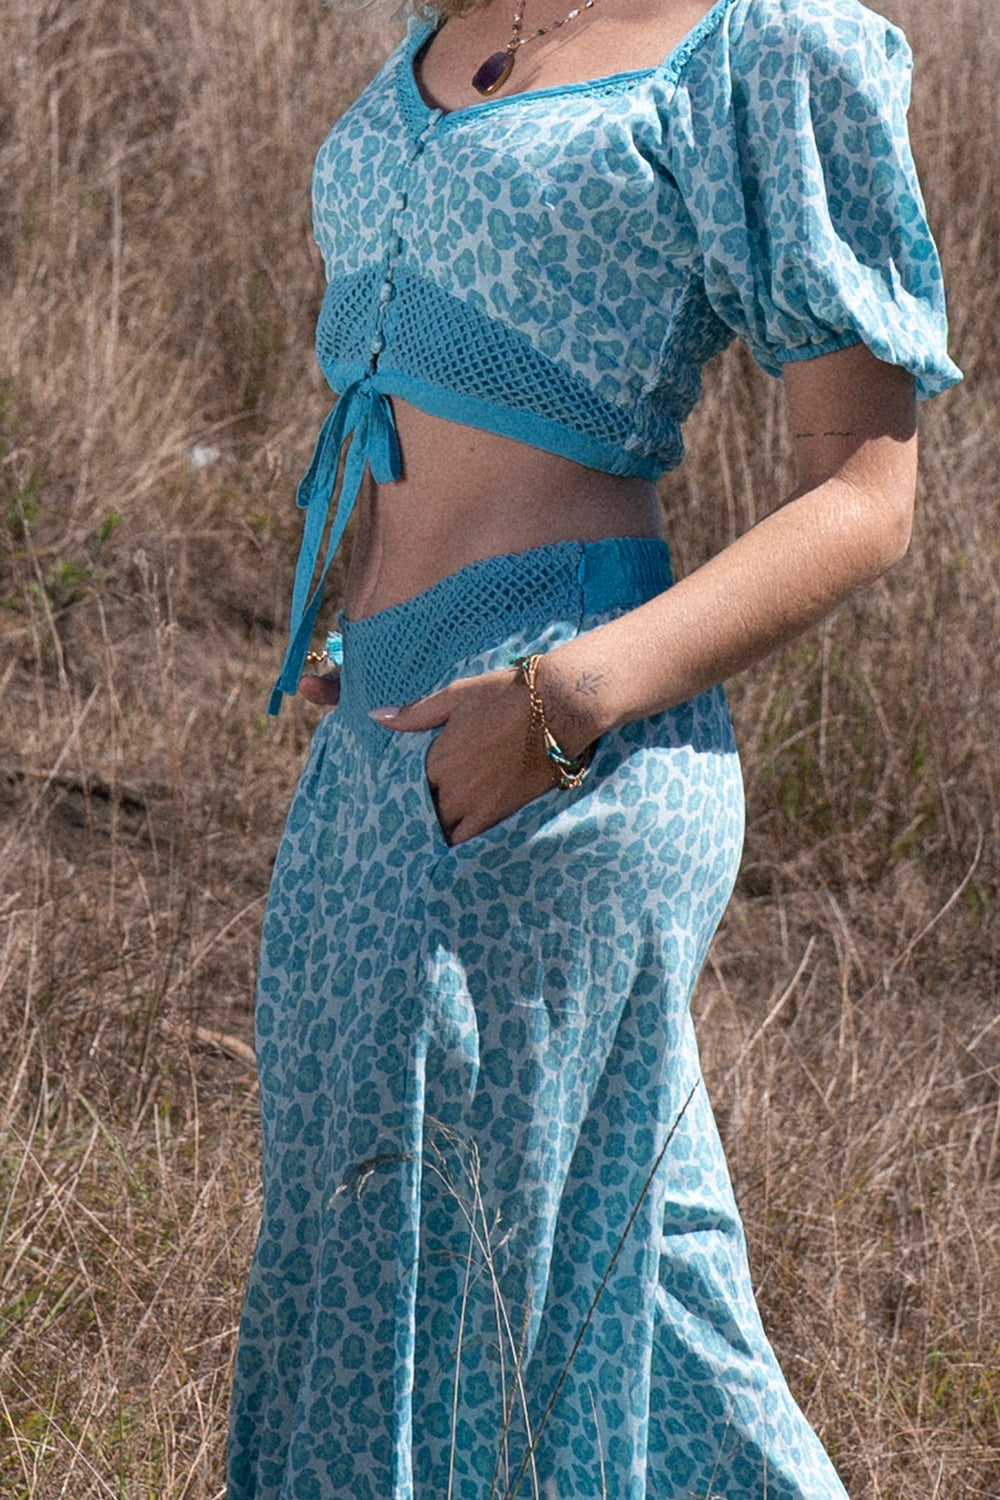 Clover Crop Top - Turquoise - Into the Wild by Tulle and Batiste